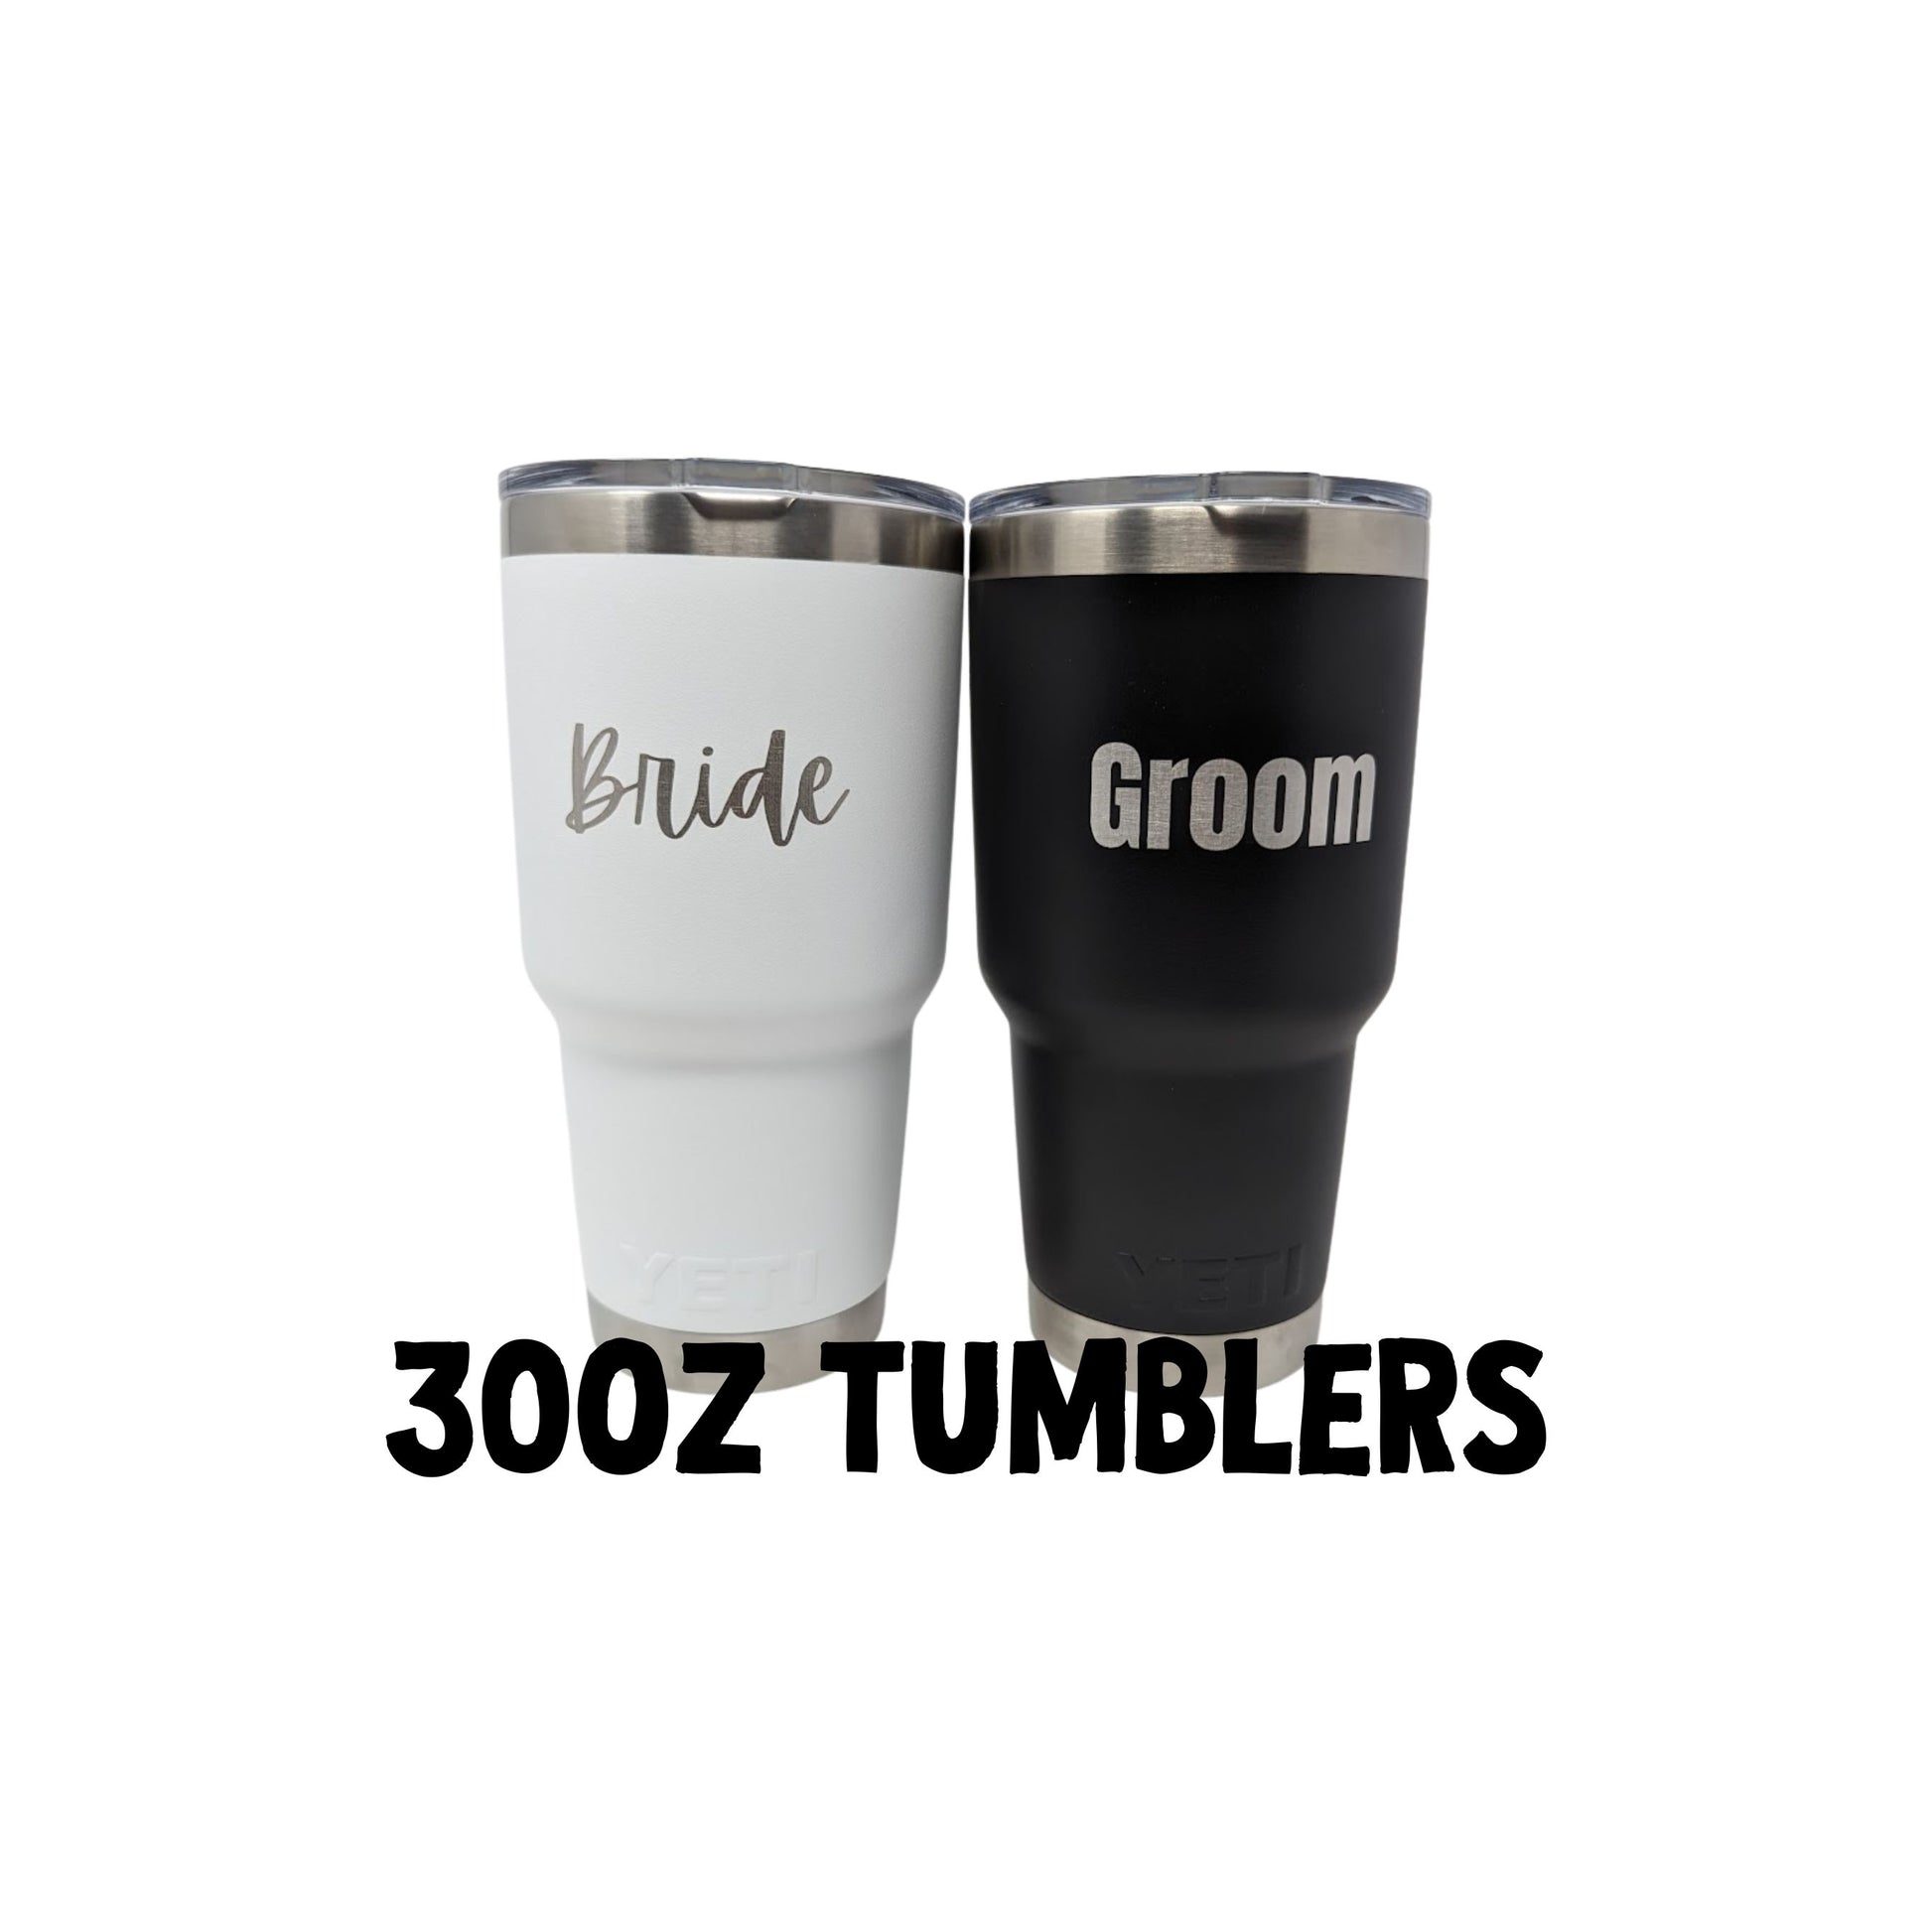 Customized Stainless Steel Tumbler 30 Ounce